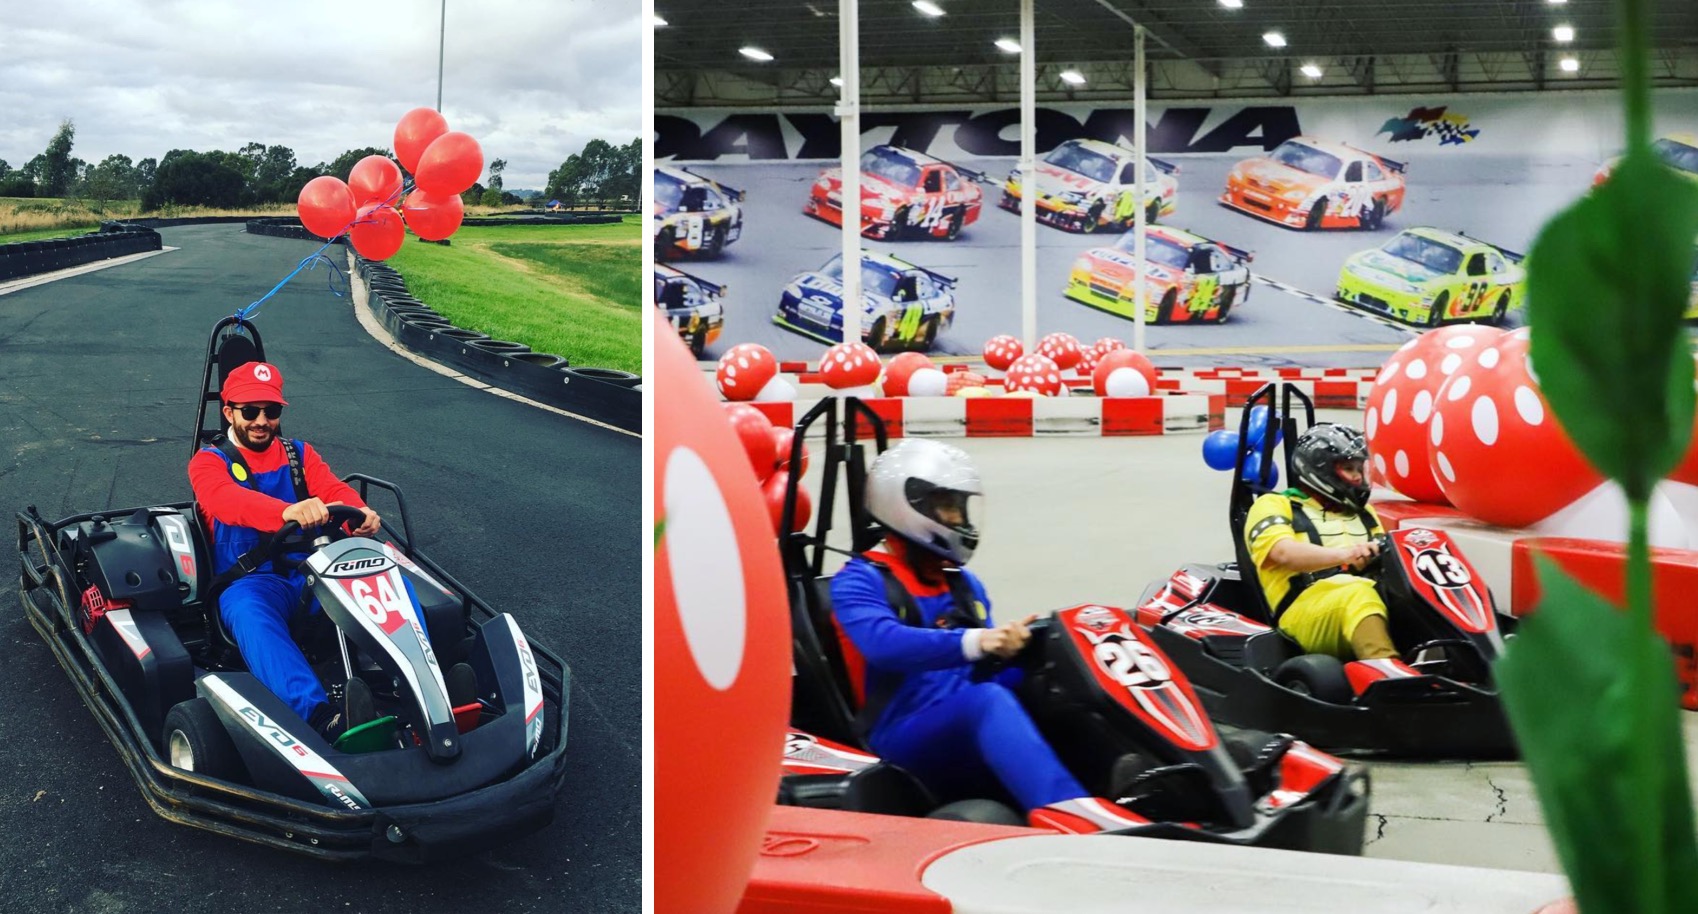 Real Life Mario Kart Race Might Be Coming to a City Near You [WATCH]